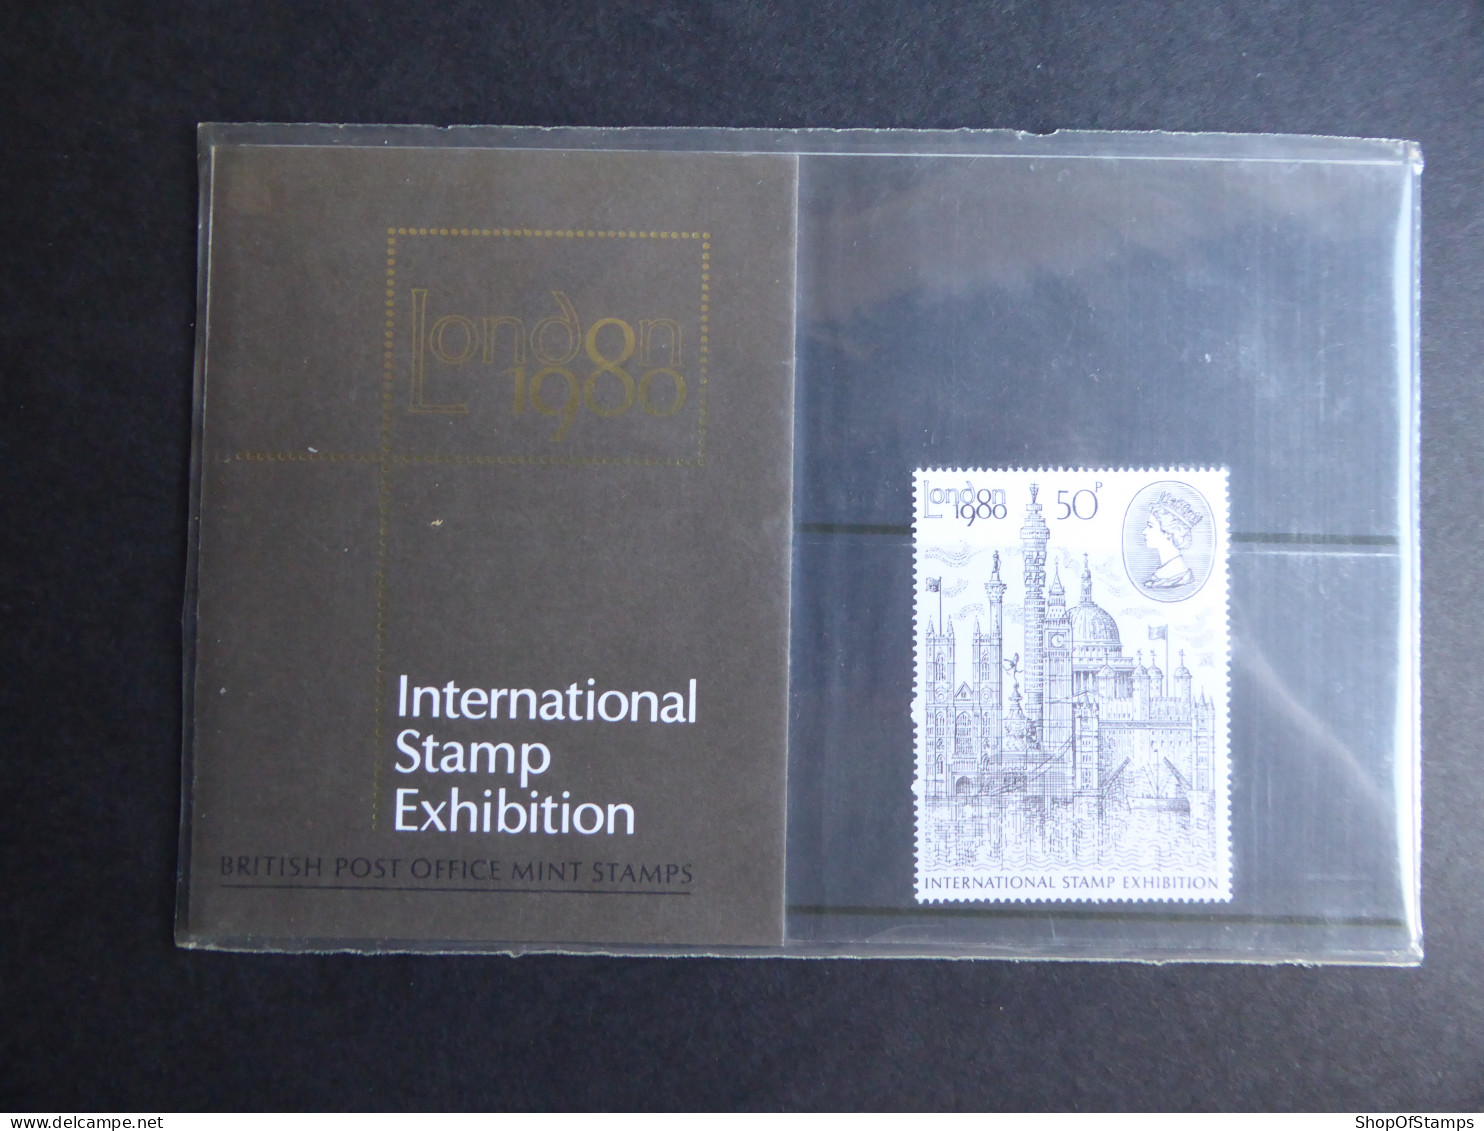 GREAT BRITAIN SG 1118 LONDON 1980 STAMP EXHIBITION MINT PRESENTATION PACK - Sheets, Plate Blocks & Multiples